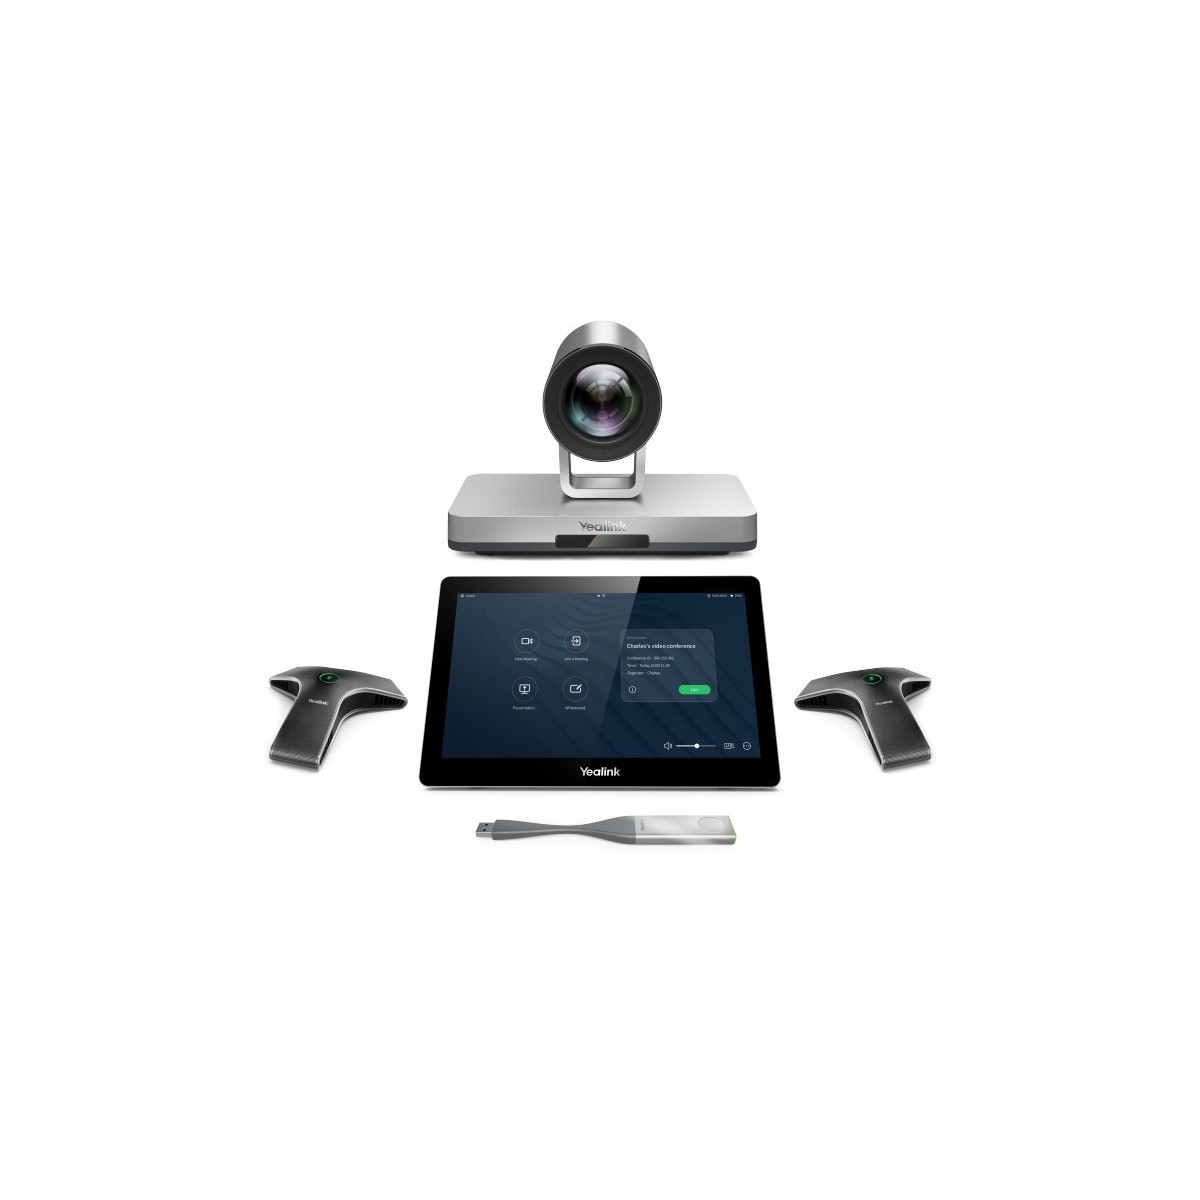 Yealink VC800 Video Conferencing System Datasheet - MIXvoip